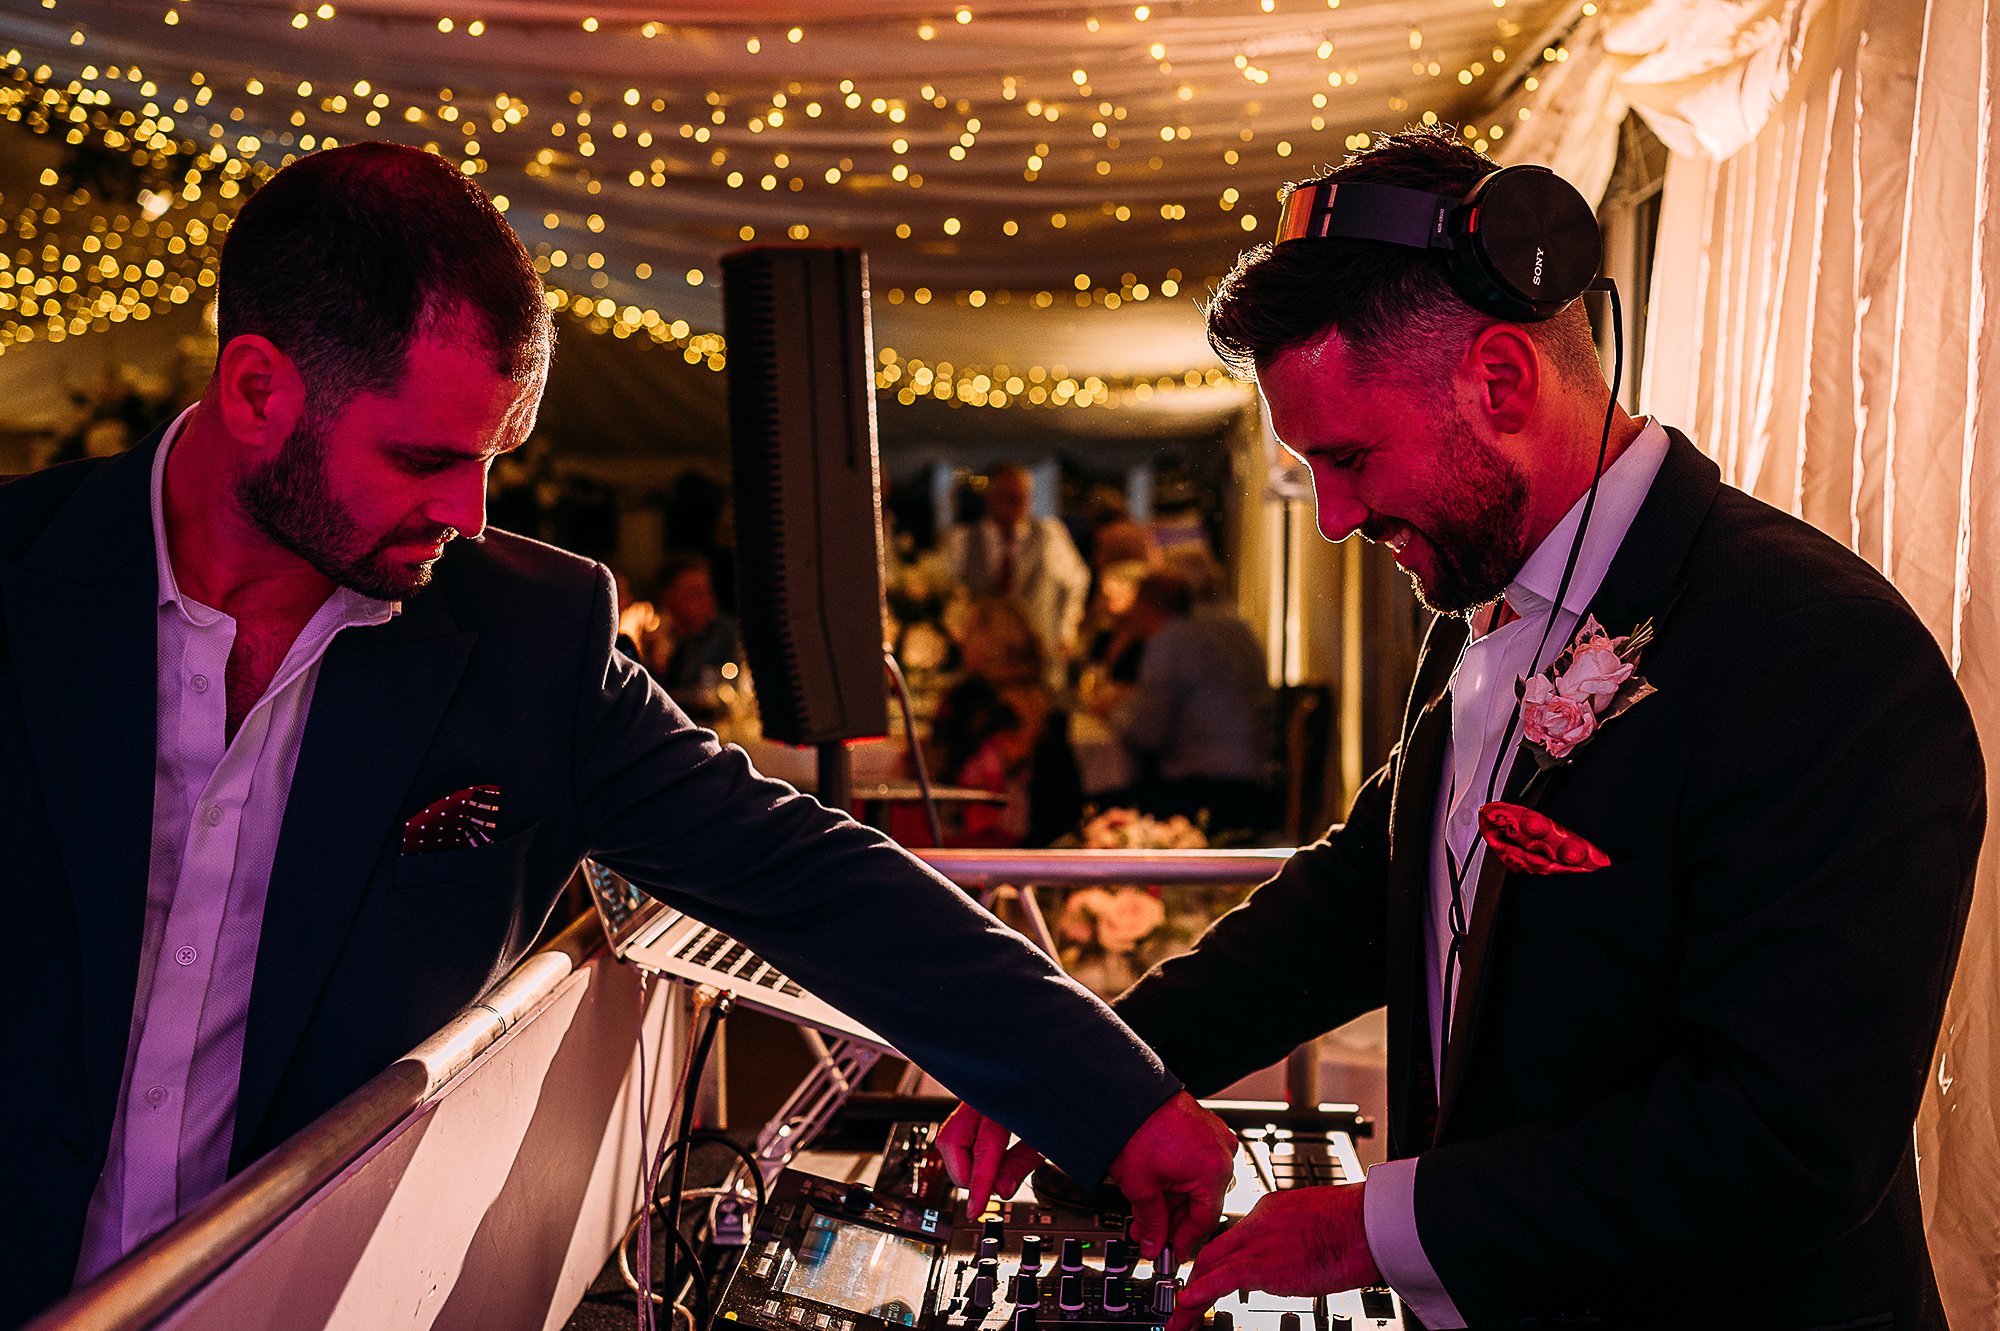  Famous DJ Danny Howard on the decks at this wedding. 